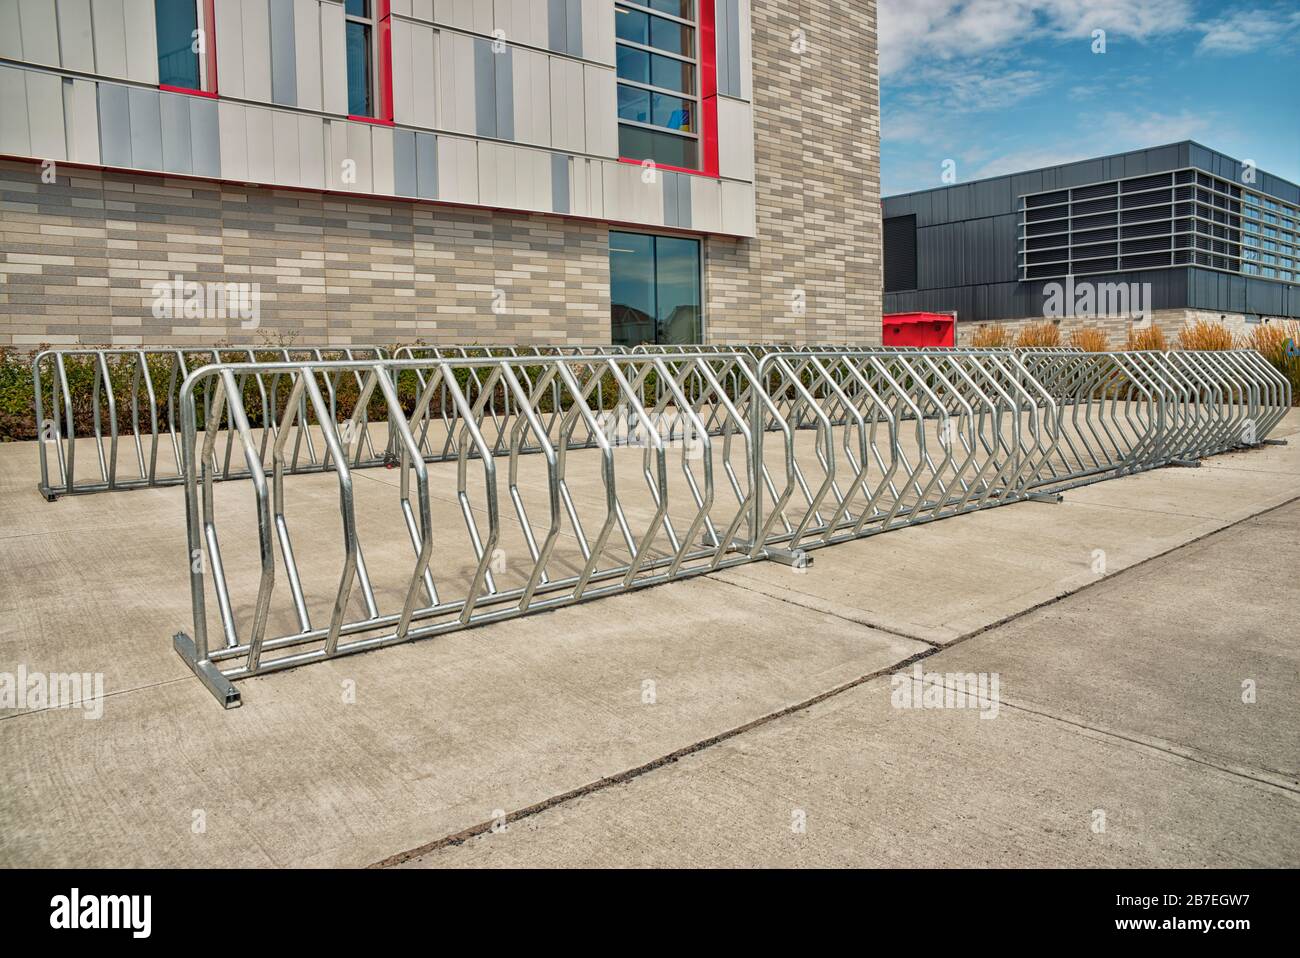 Bike parking of an elementary school building, backside. Sunny spring day. Stock Photo